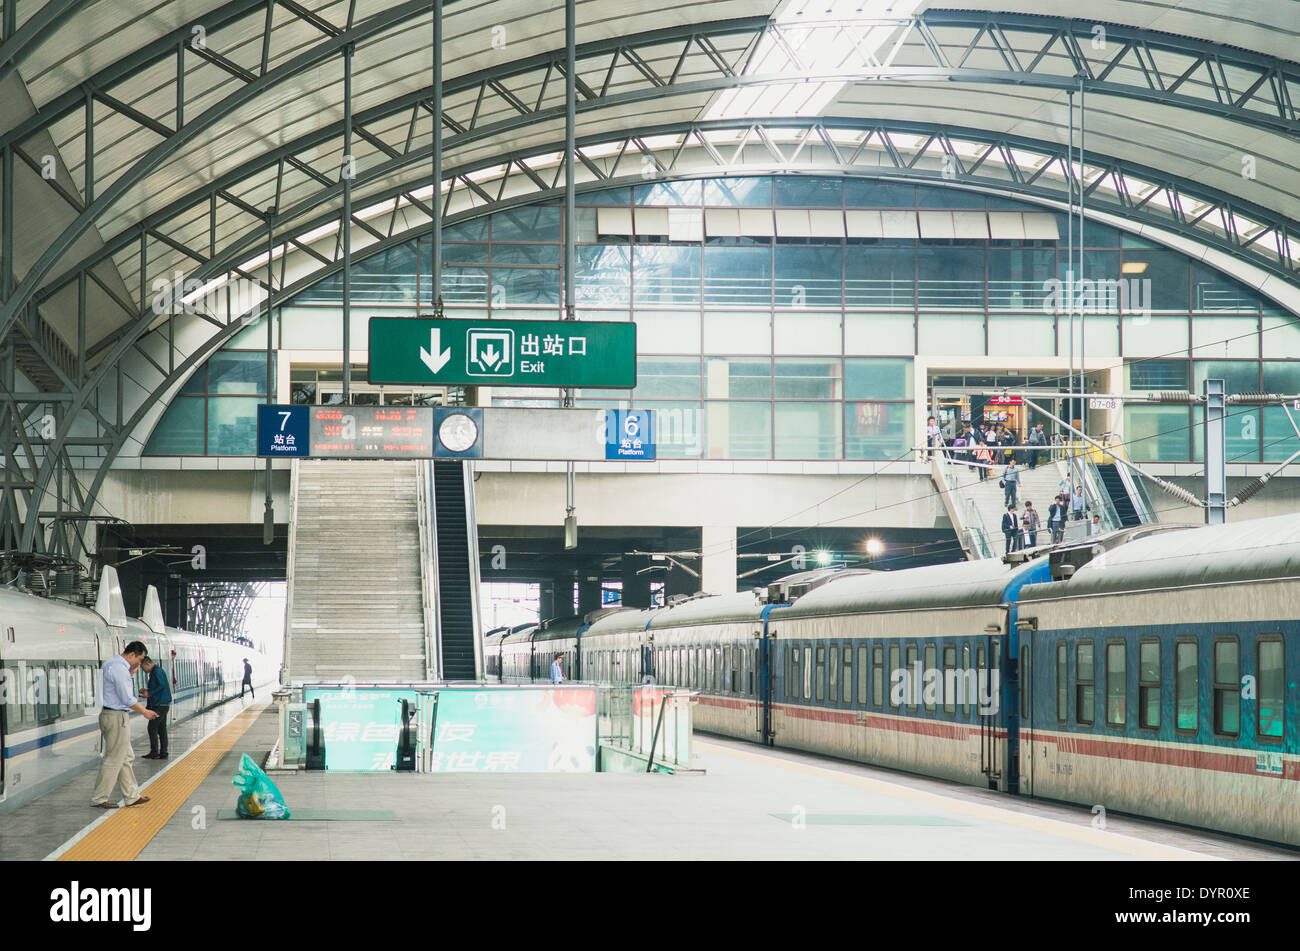 Wuhan Train station, a modern train station in China. Stock Photo